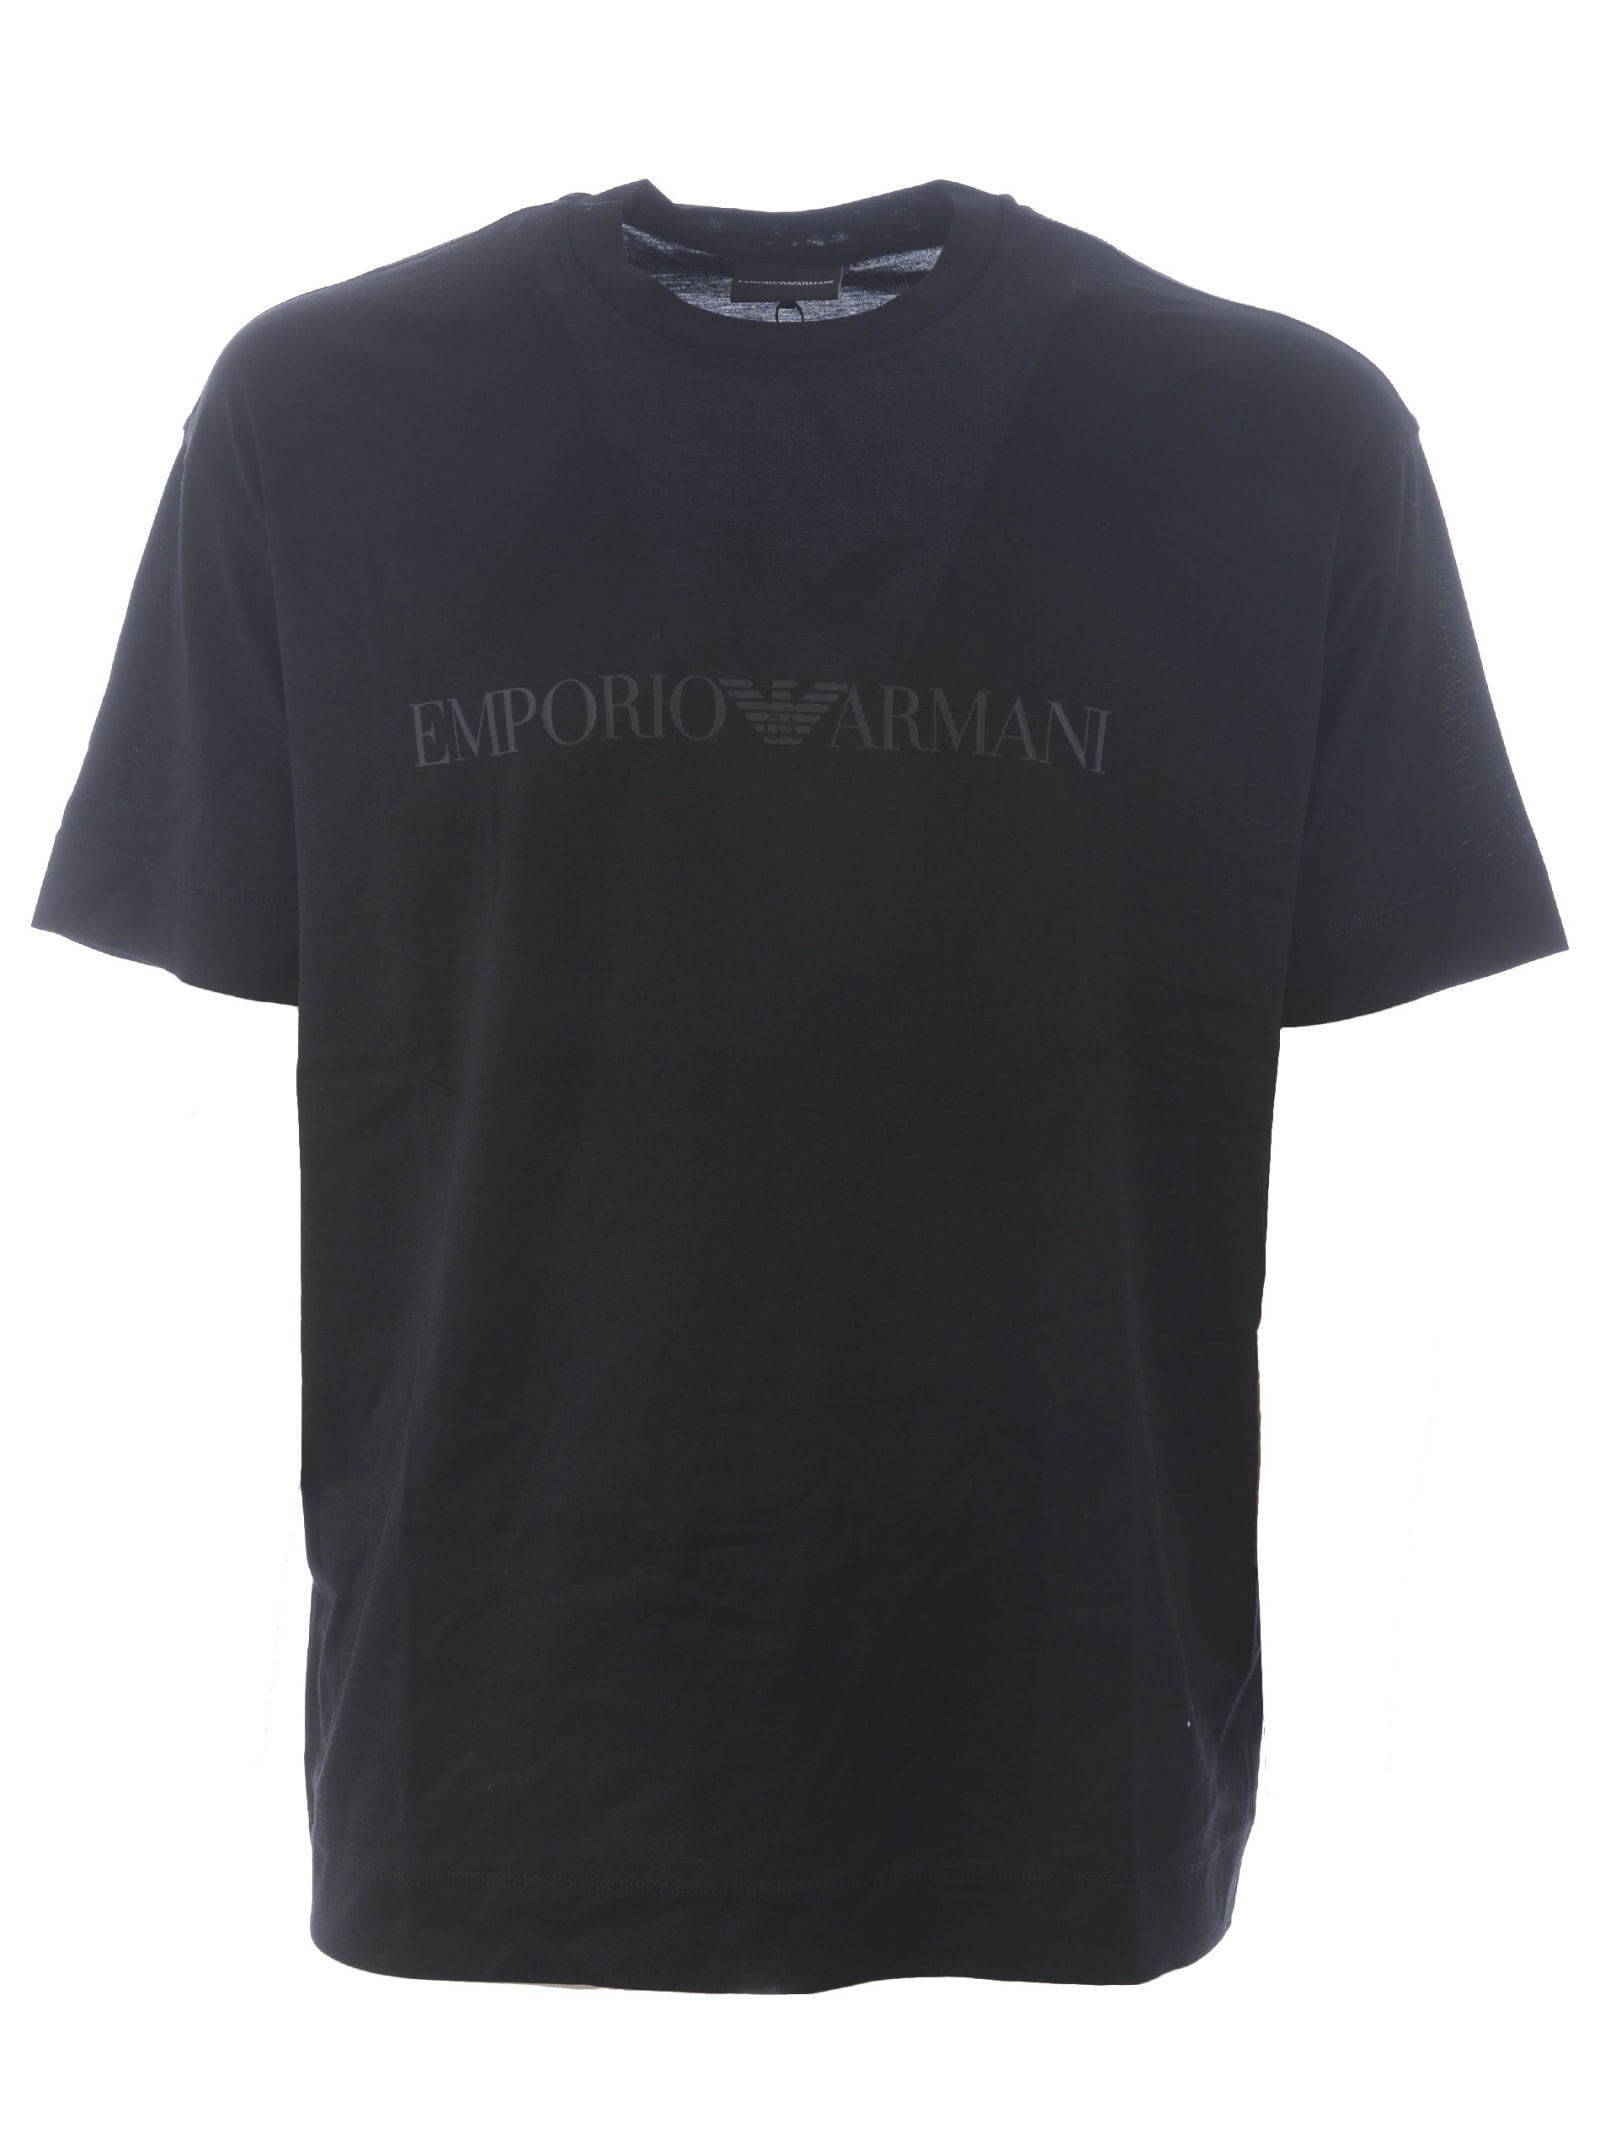 Emporio Armani T-shirt In Cotton And Lyocell Blend